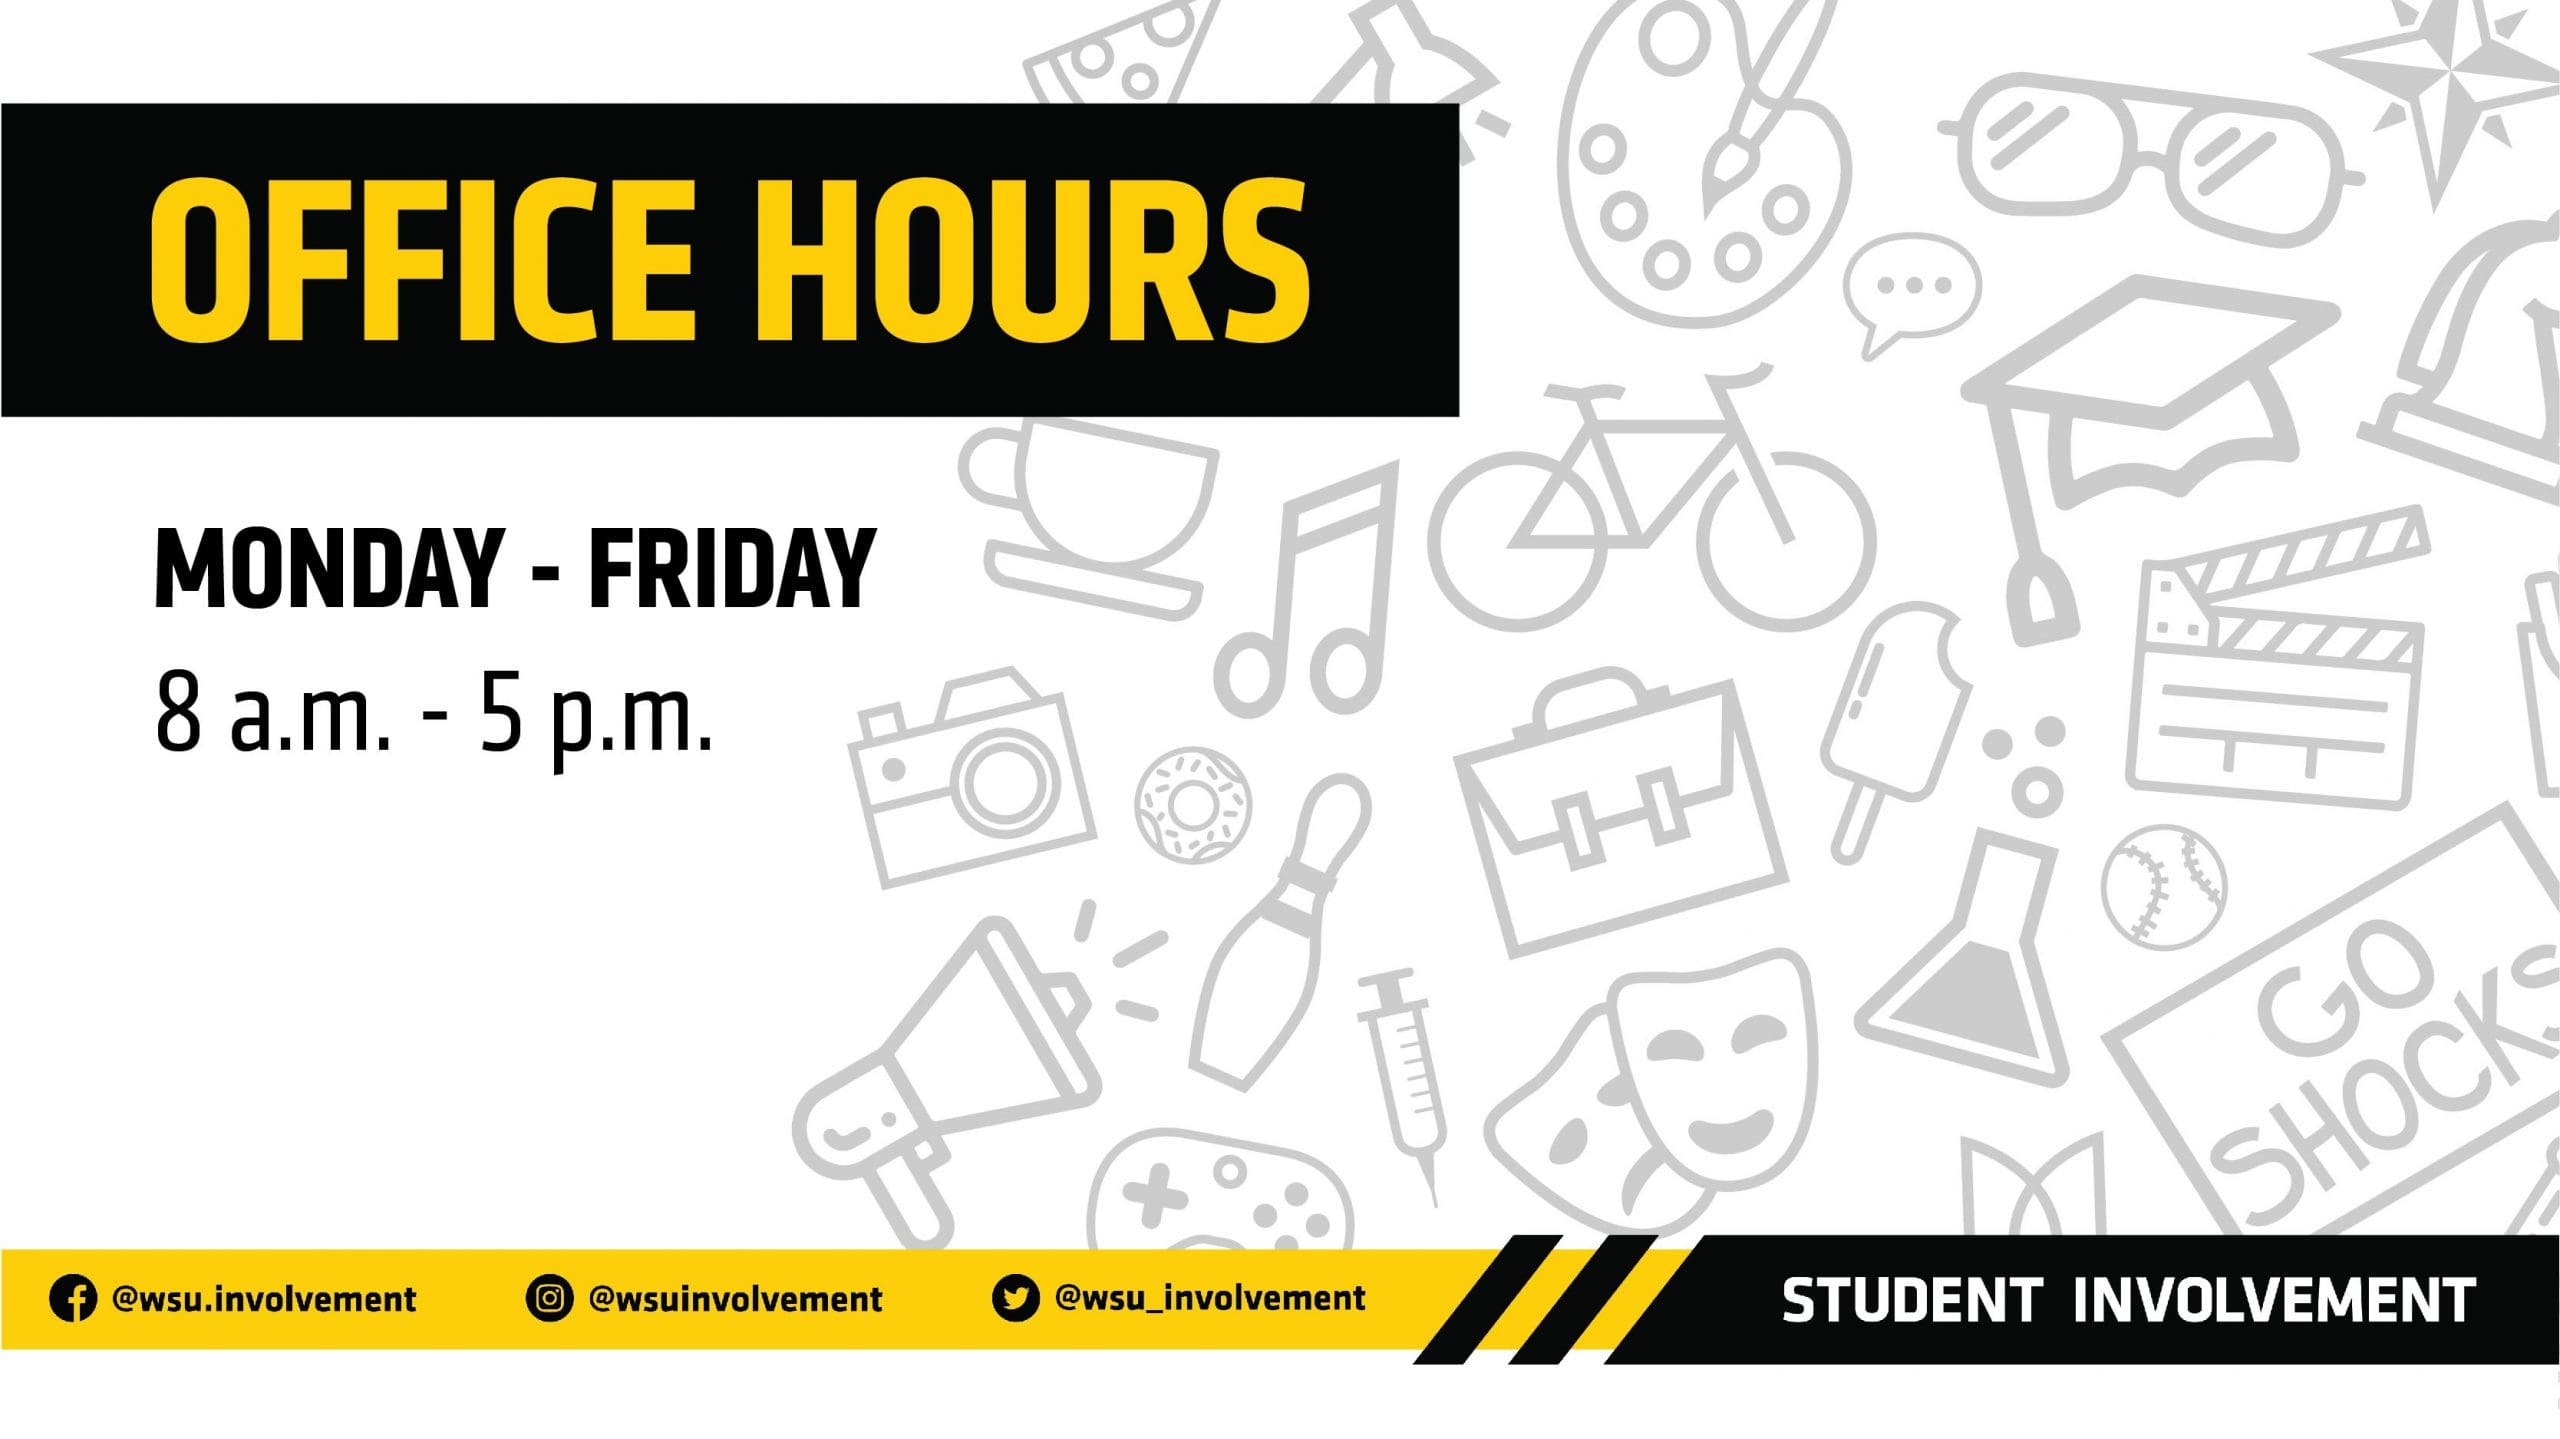 Student Involvement Office Hours: Monday-Friday, 8 a.m. - 5 p.m.